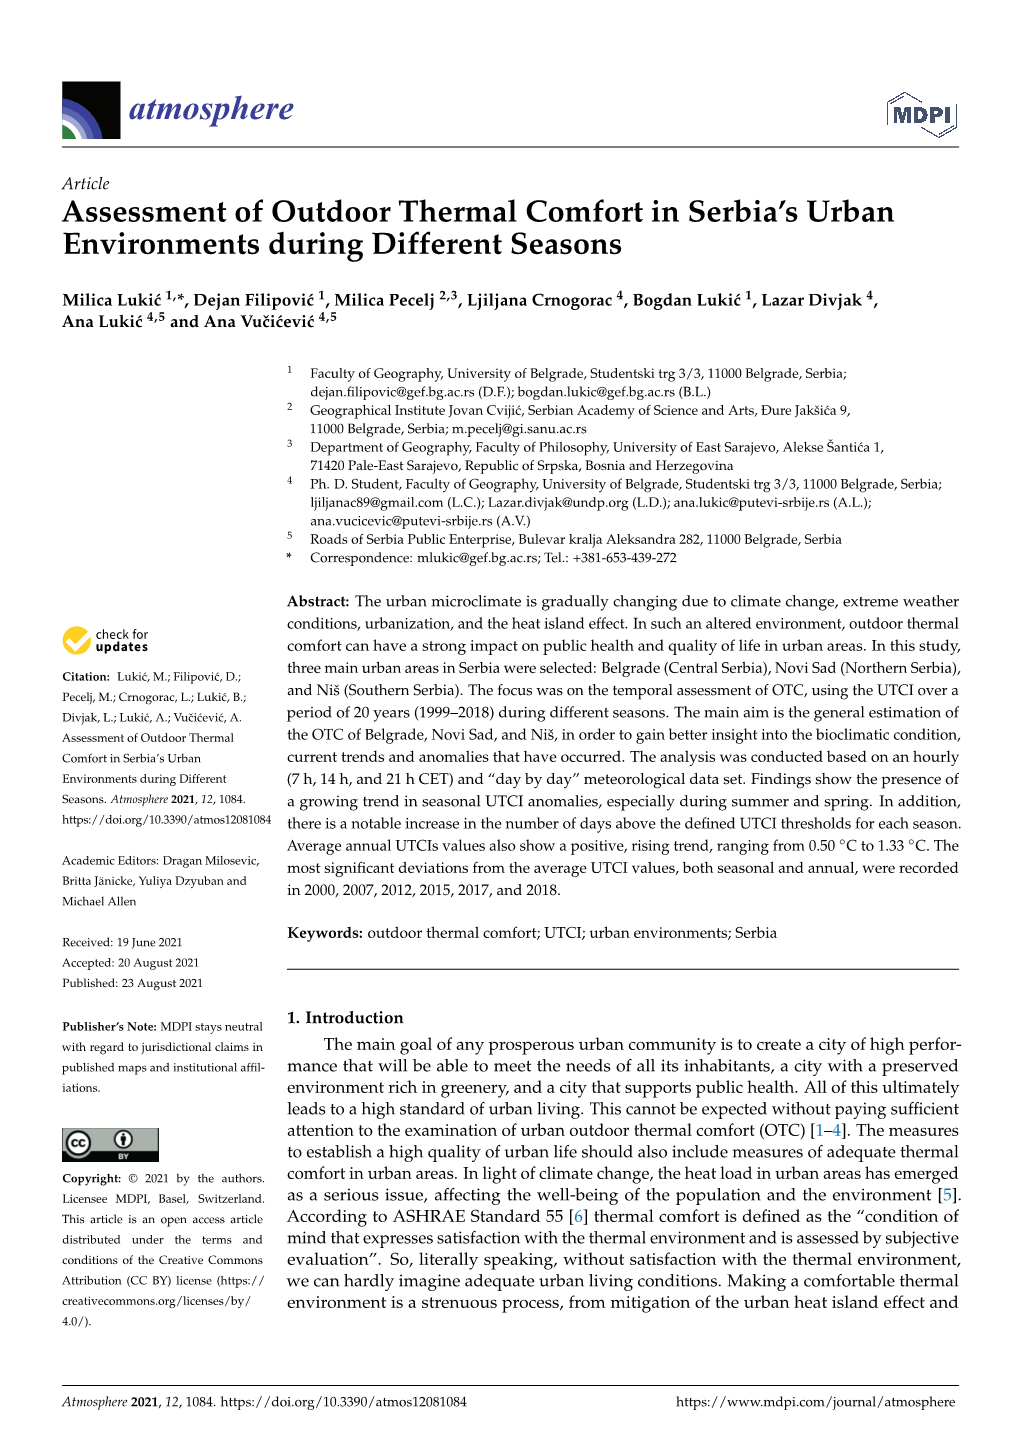 Assessment of Outdoor Thermal Comfort in Serbia's Urban Environments During Different Seasons